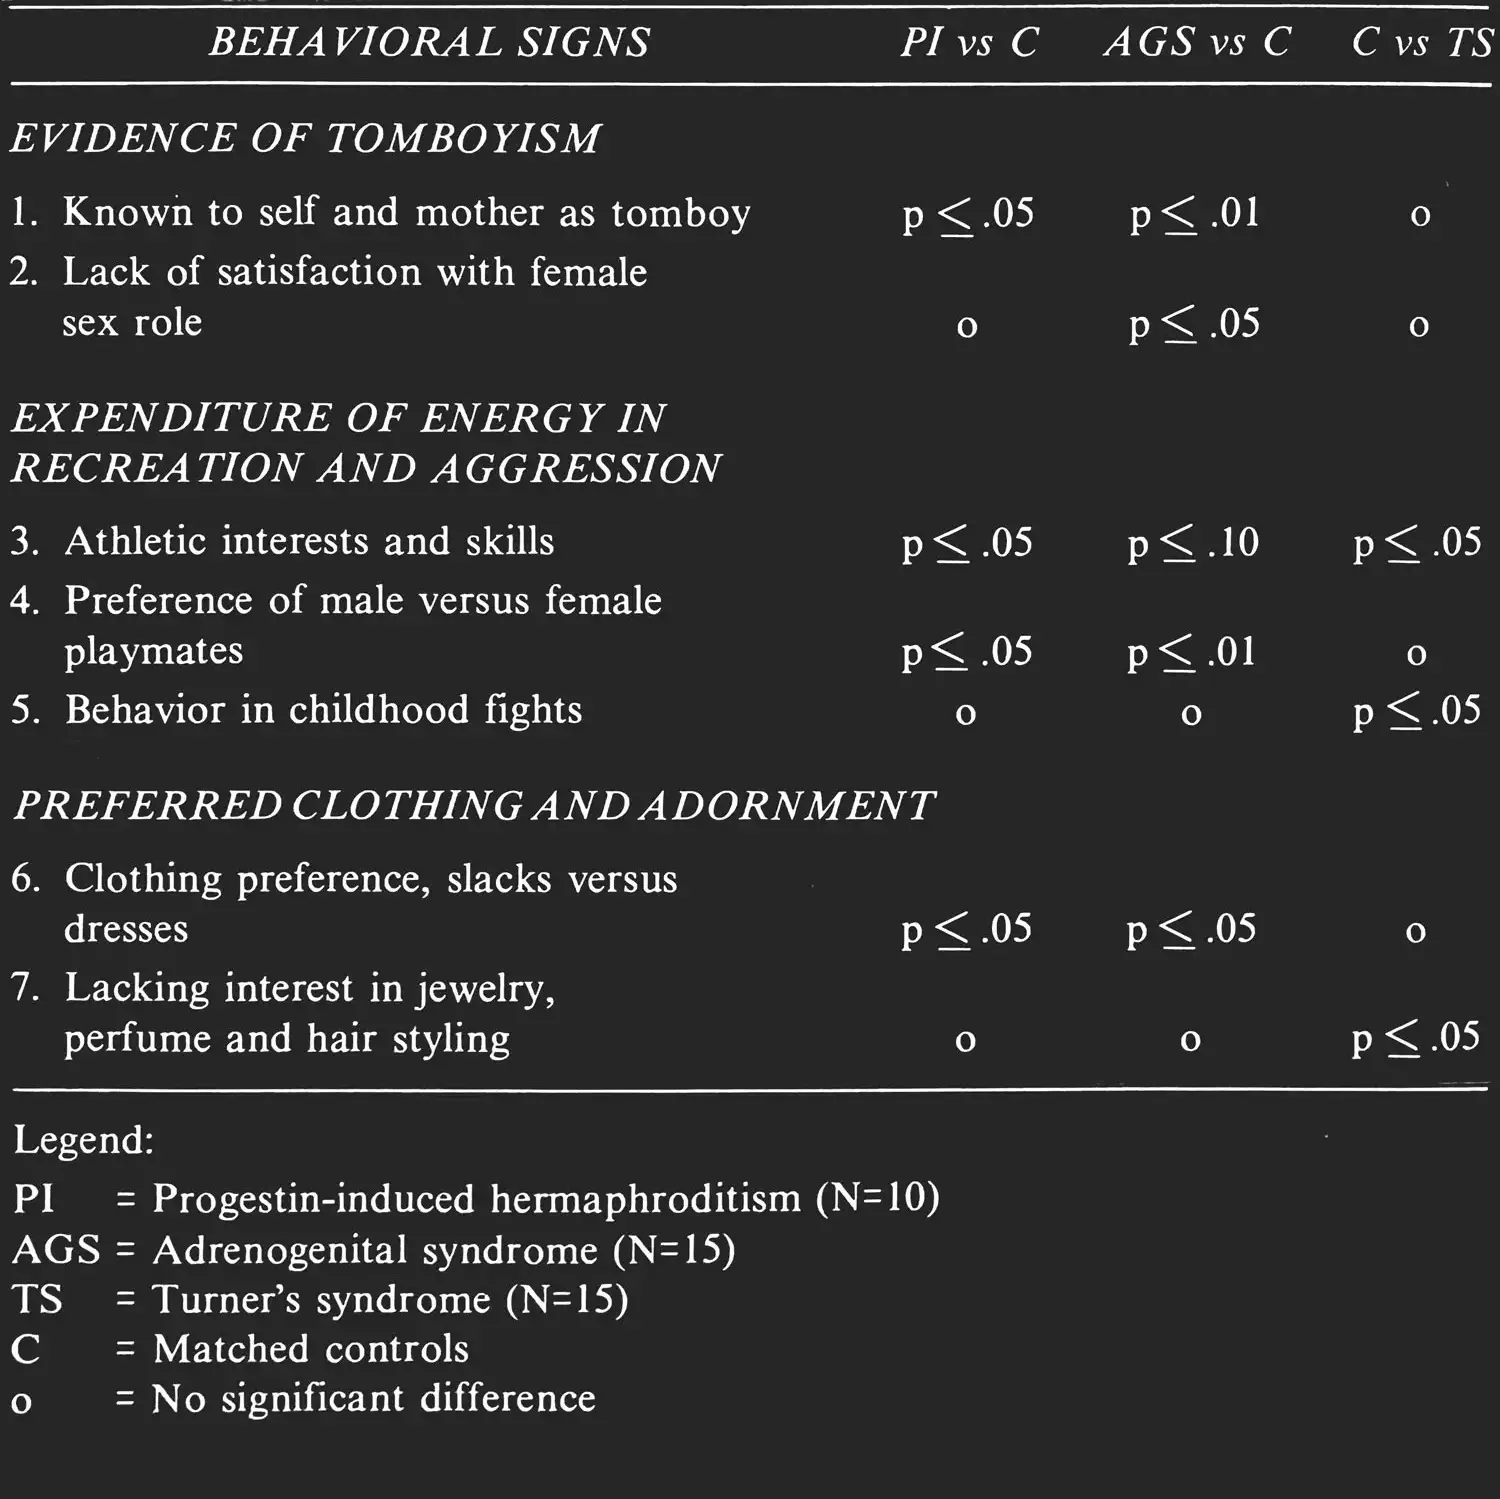 Table that lists behavioral signs of tomboyism and p values for different conditions such as Progestin-induced hermaphroditism or Adrenogenital syndrome. Signs that are recorded include “known to self or mother as tomboy,” “preference of male versus female friends,” and “lacking interest in jewelry, perfume and hair styling.” 